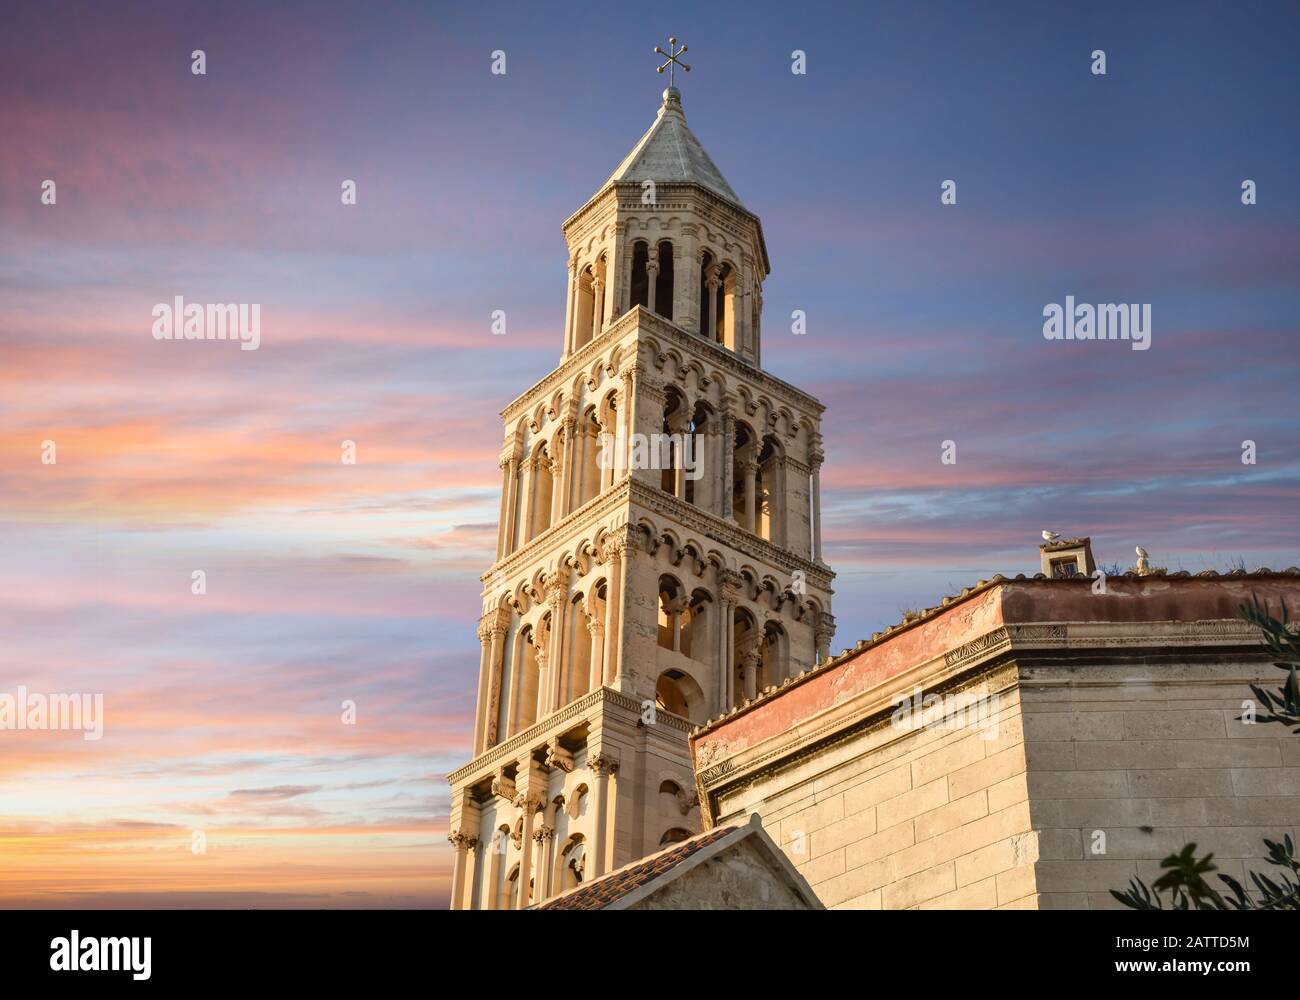 The tower of Saint Domnius Cathedral at sunset in the Diocletian's Palace Old Town of Split, Croatia. Stock Photo